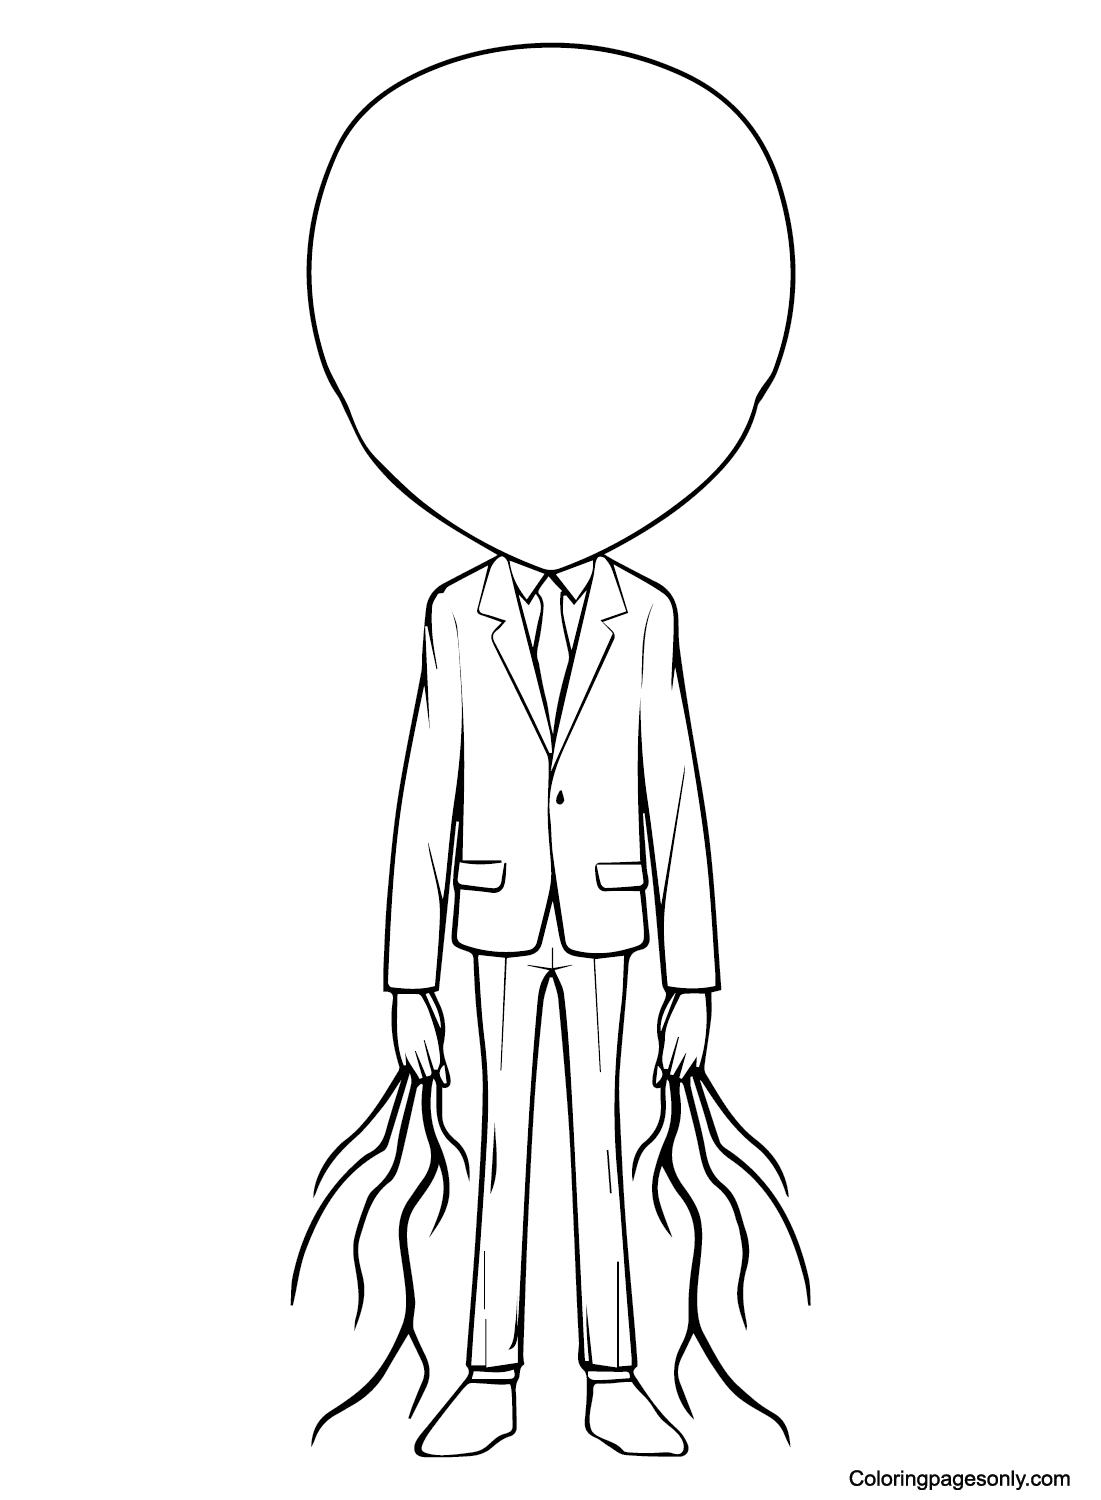 Slender man coloring pages printable for free download